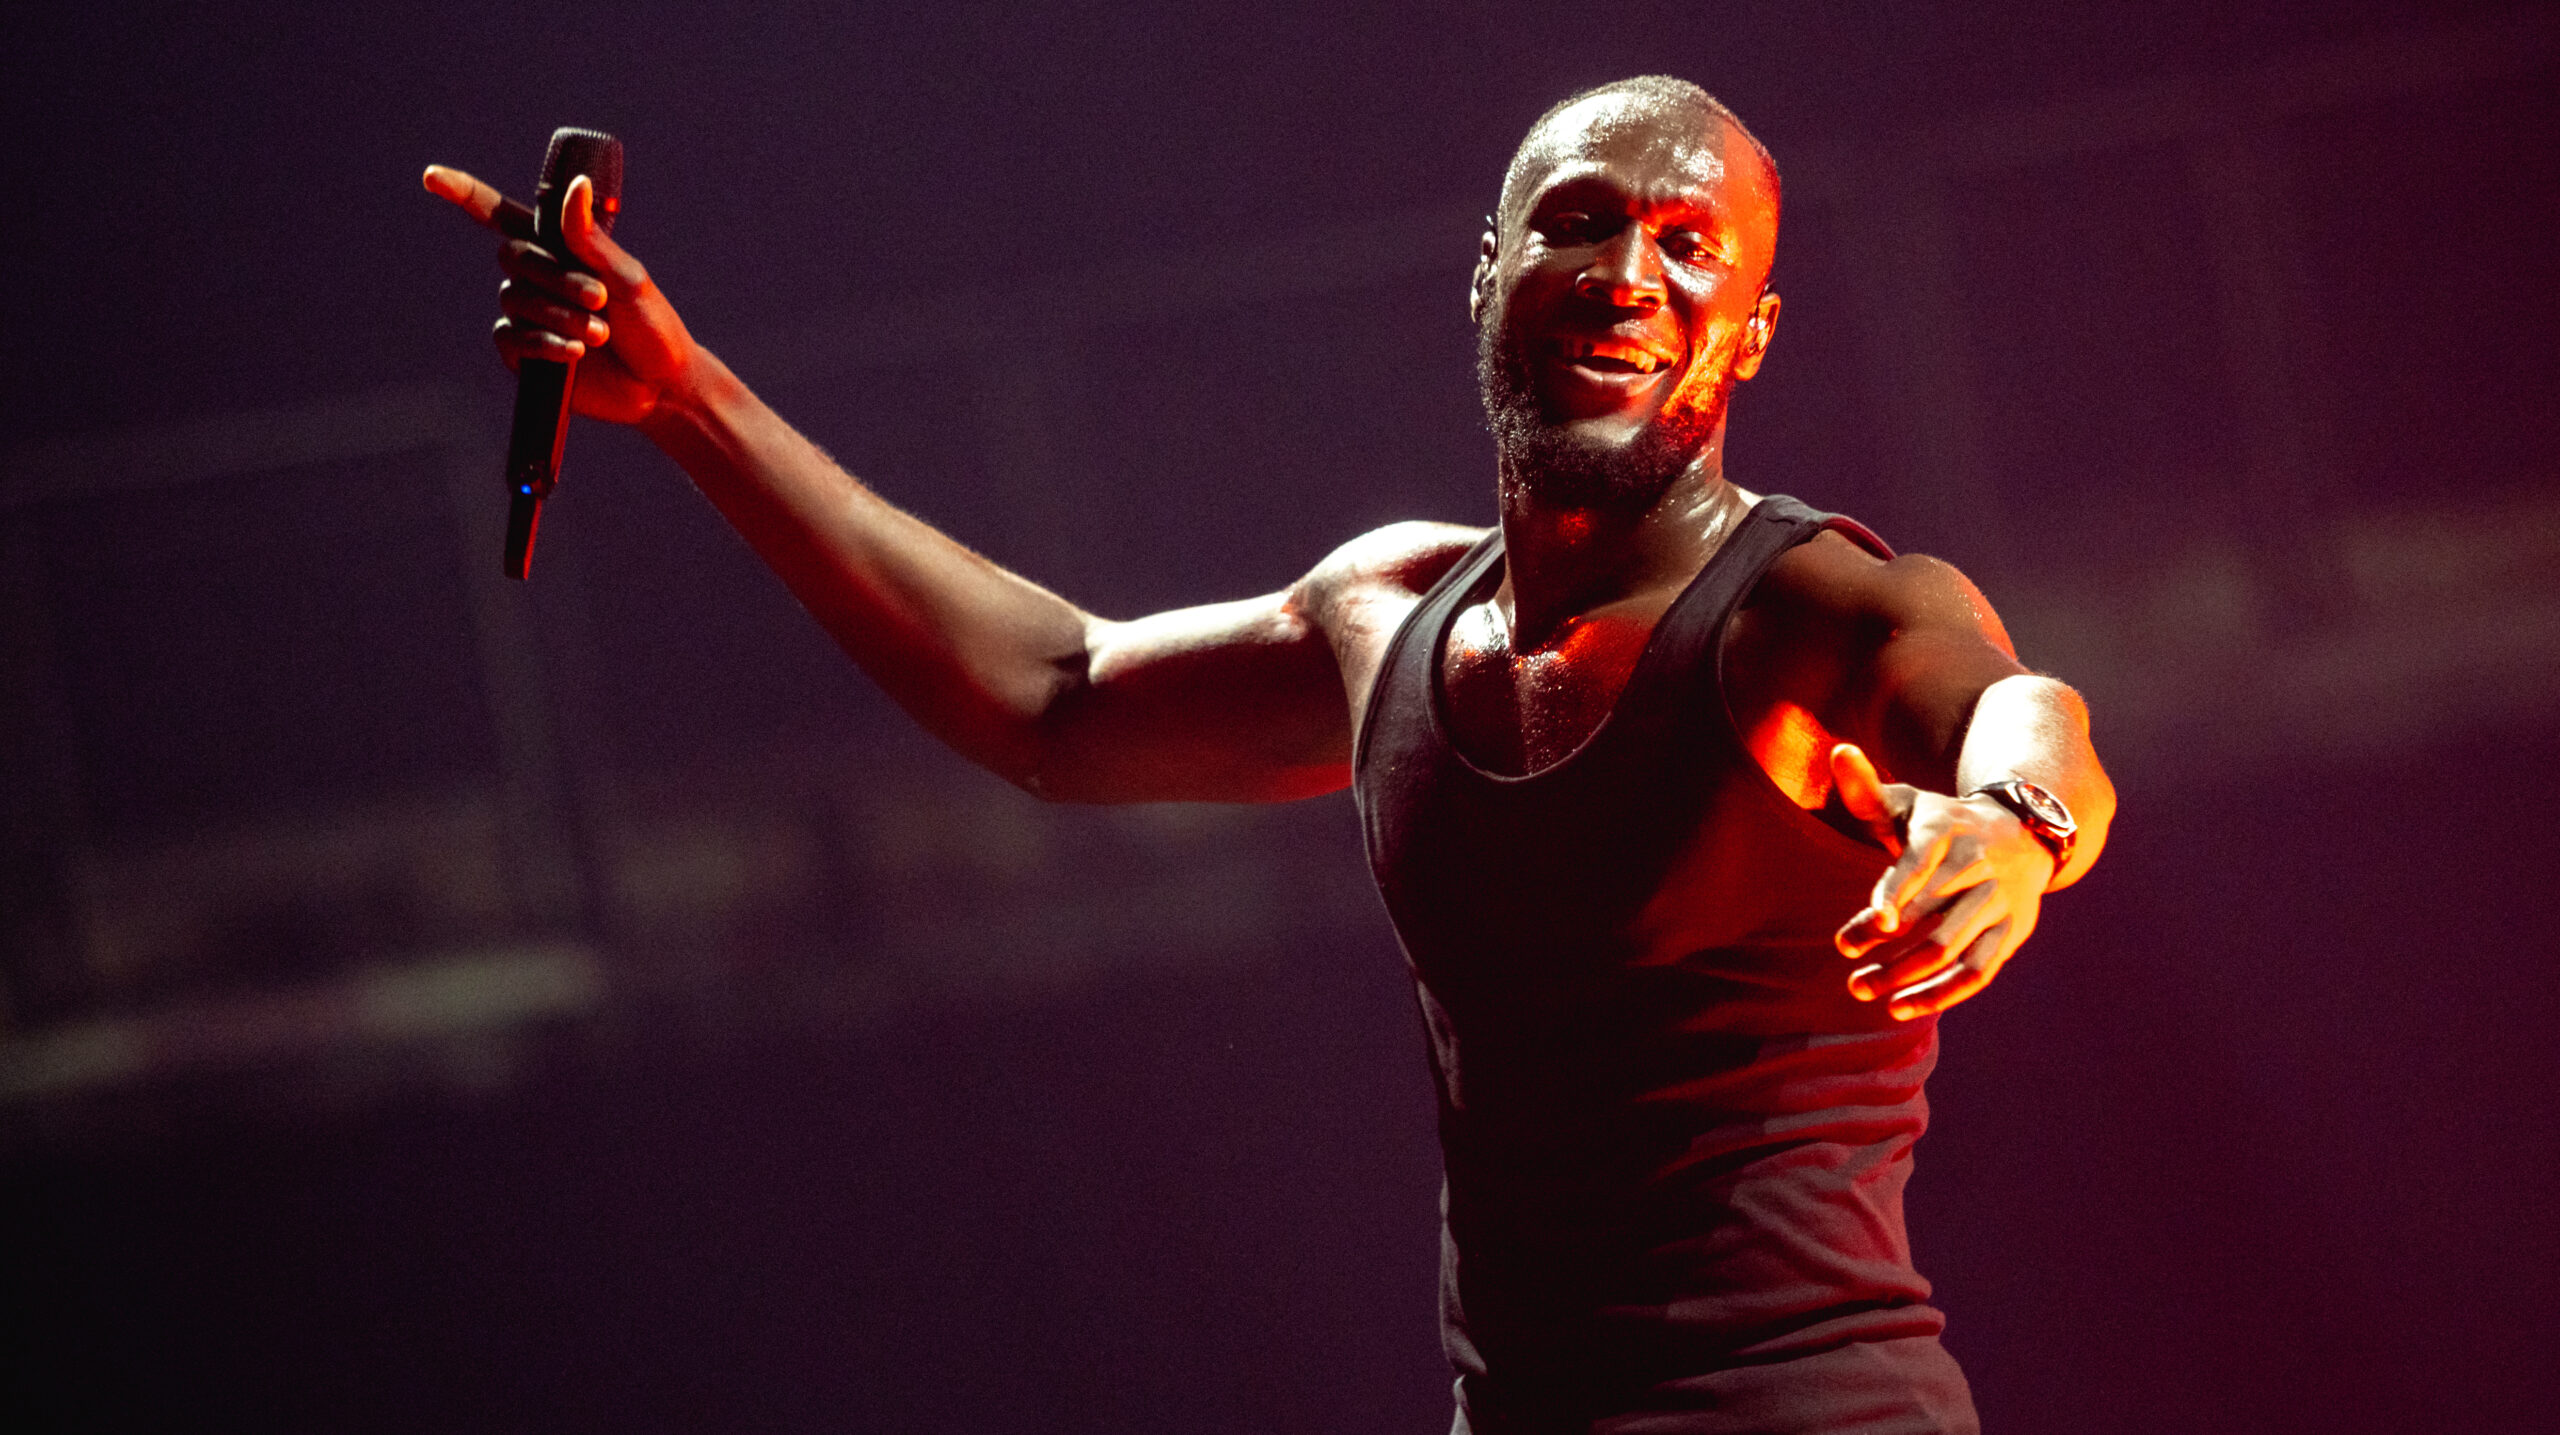 Election 2019: How a Stormzy tweet caused an ‘emergency conference on possible hostile foreign activity’